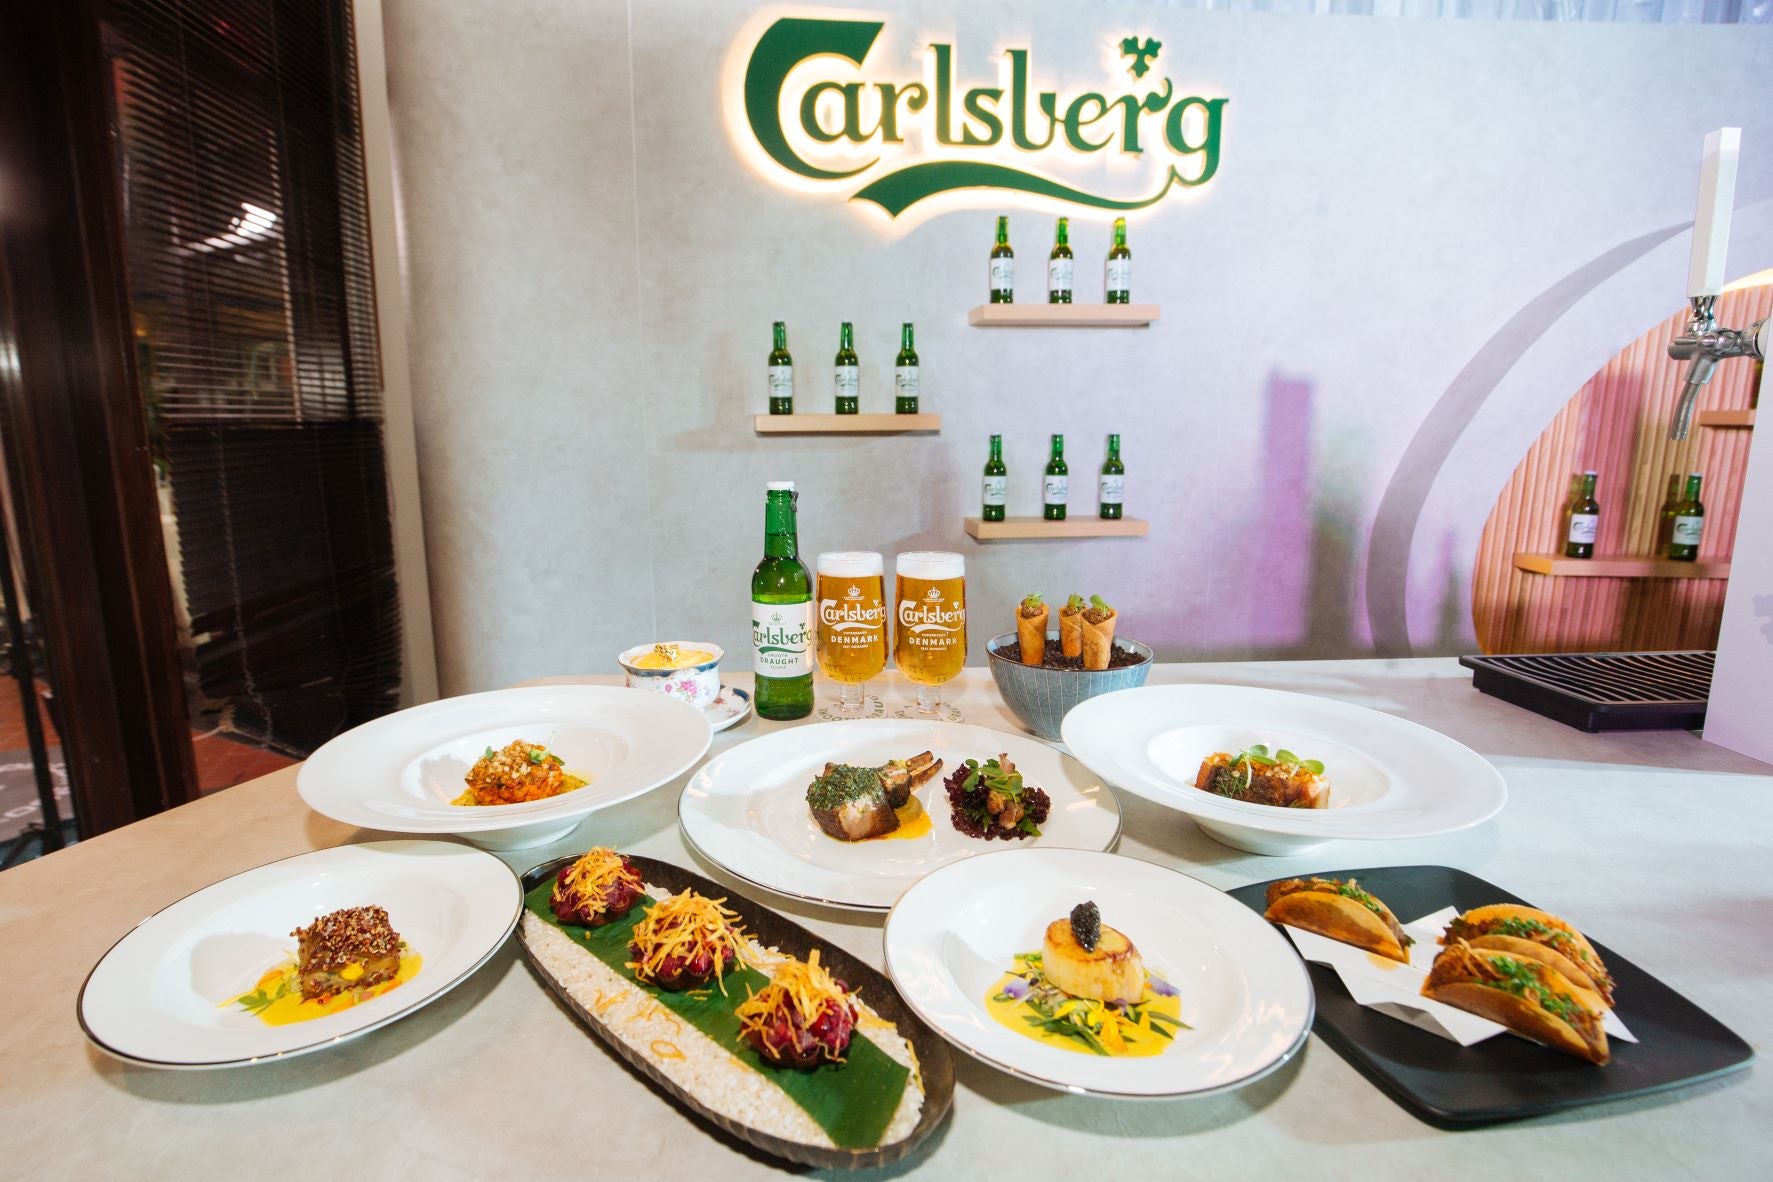 CarlsbergSpicy Smooth Draught presents a four course meal